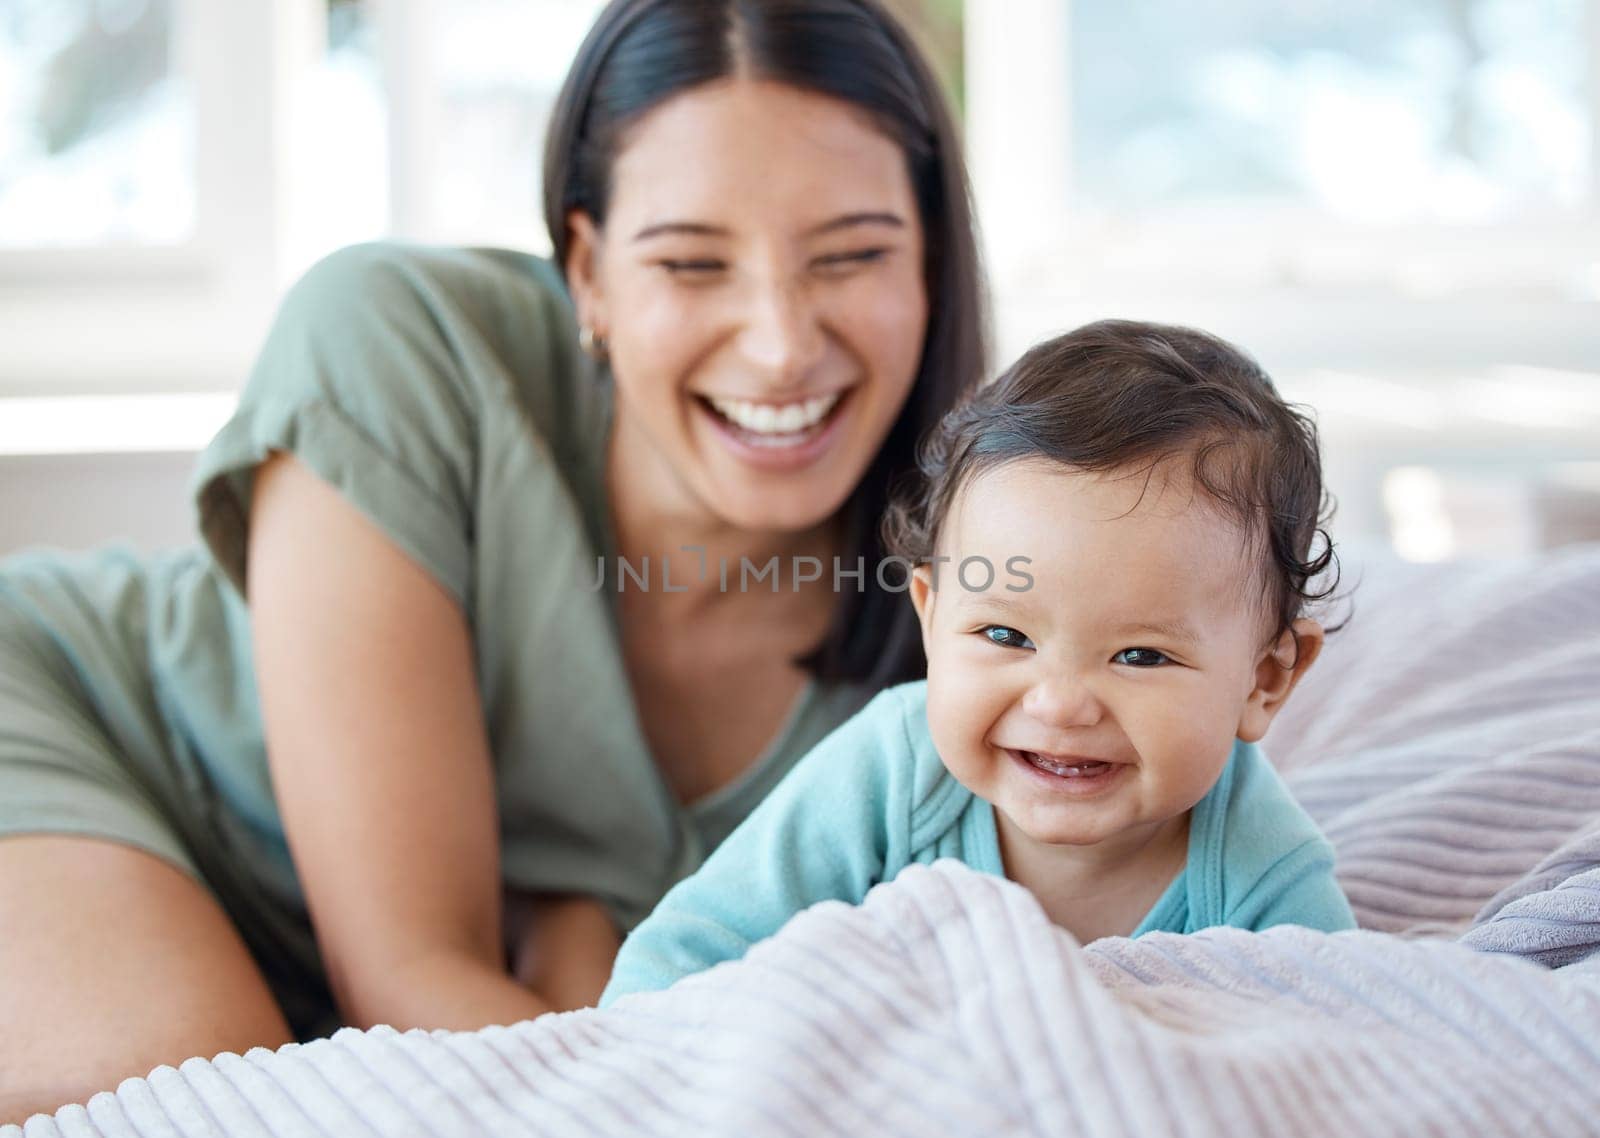 Mother, laughing baby and play on bed in home for love, care and quality time together with joy, growth and kids development. Happy mom, infant child and crawling for fun with newborn girl in bedroom.